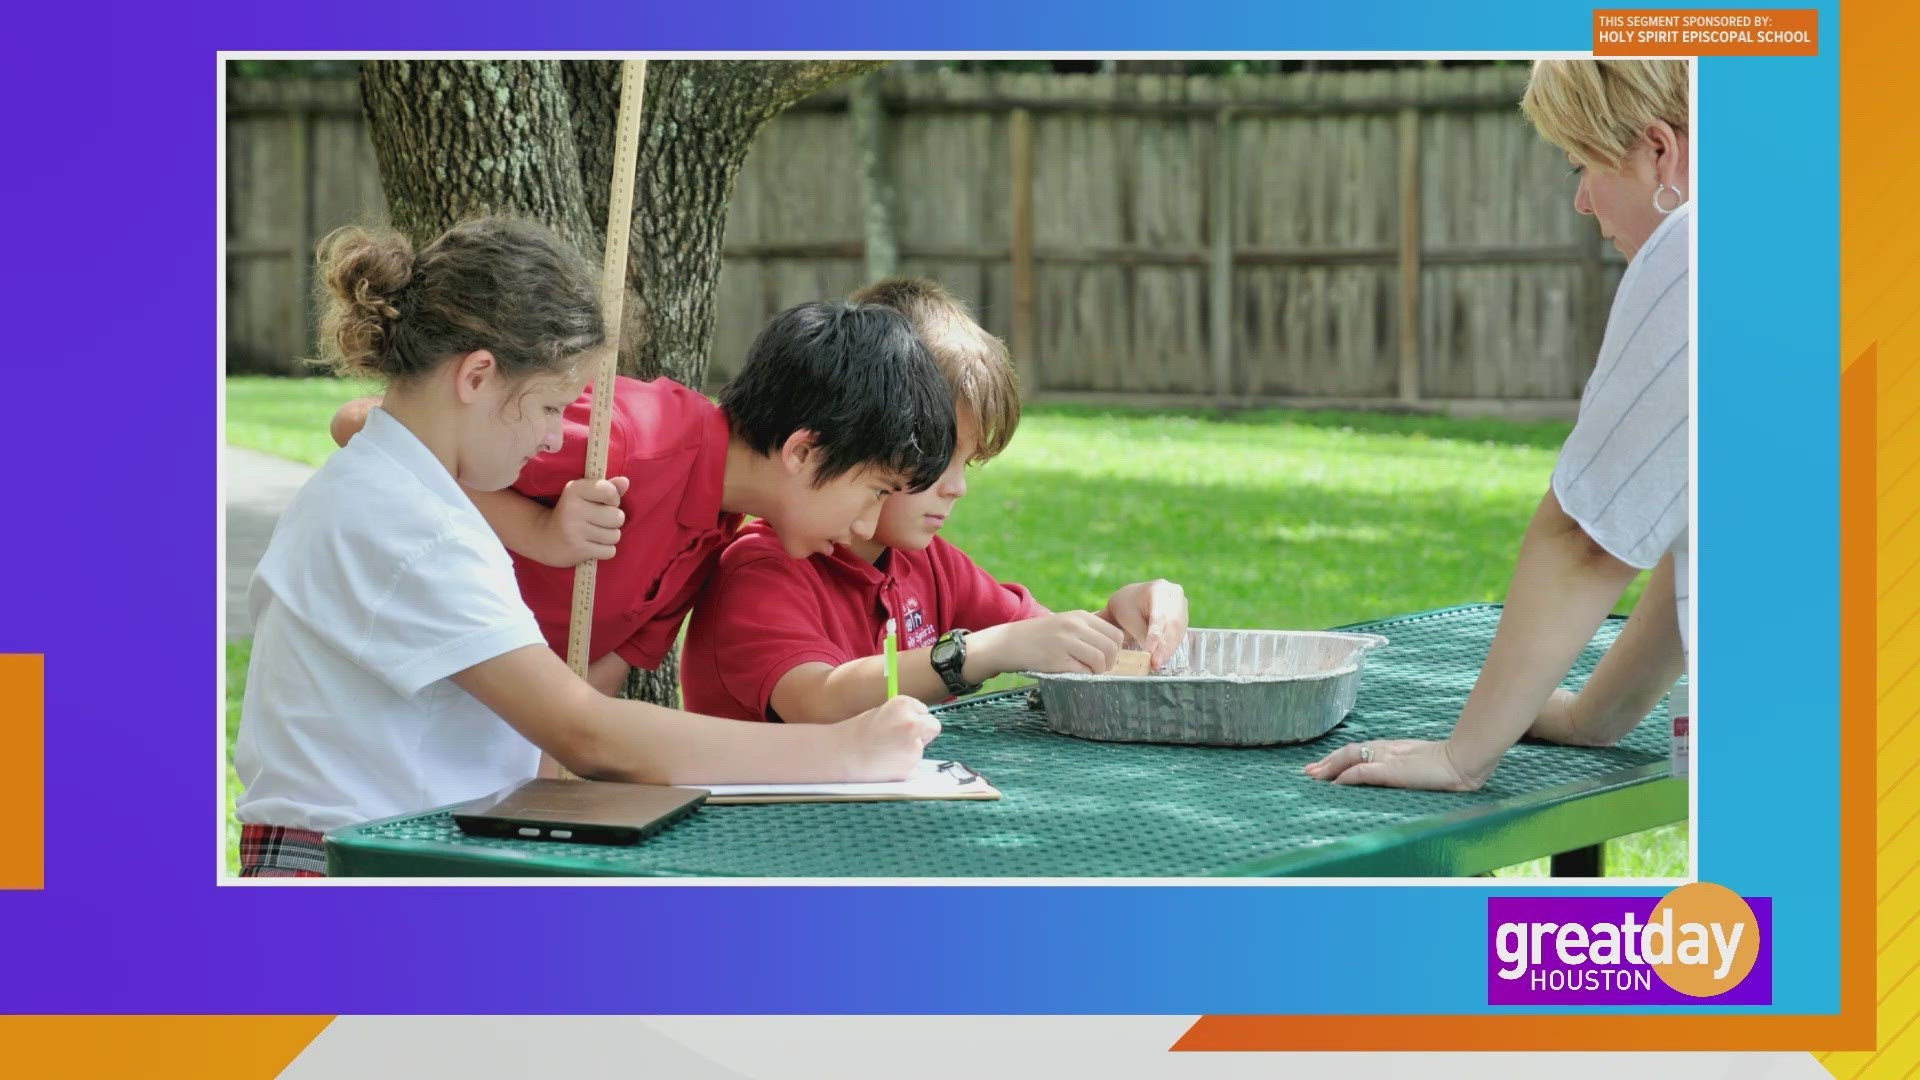 Holy Spirit Episcopal School offers engaging, inspiring education for K - 8 students in Houston.